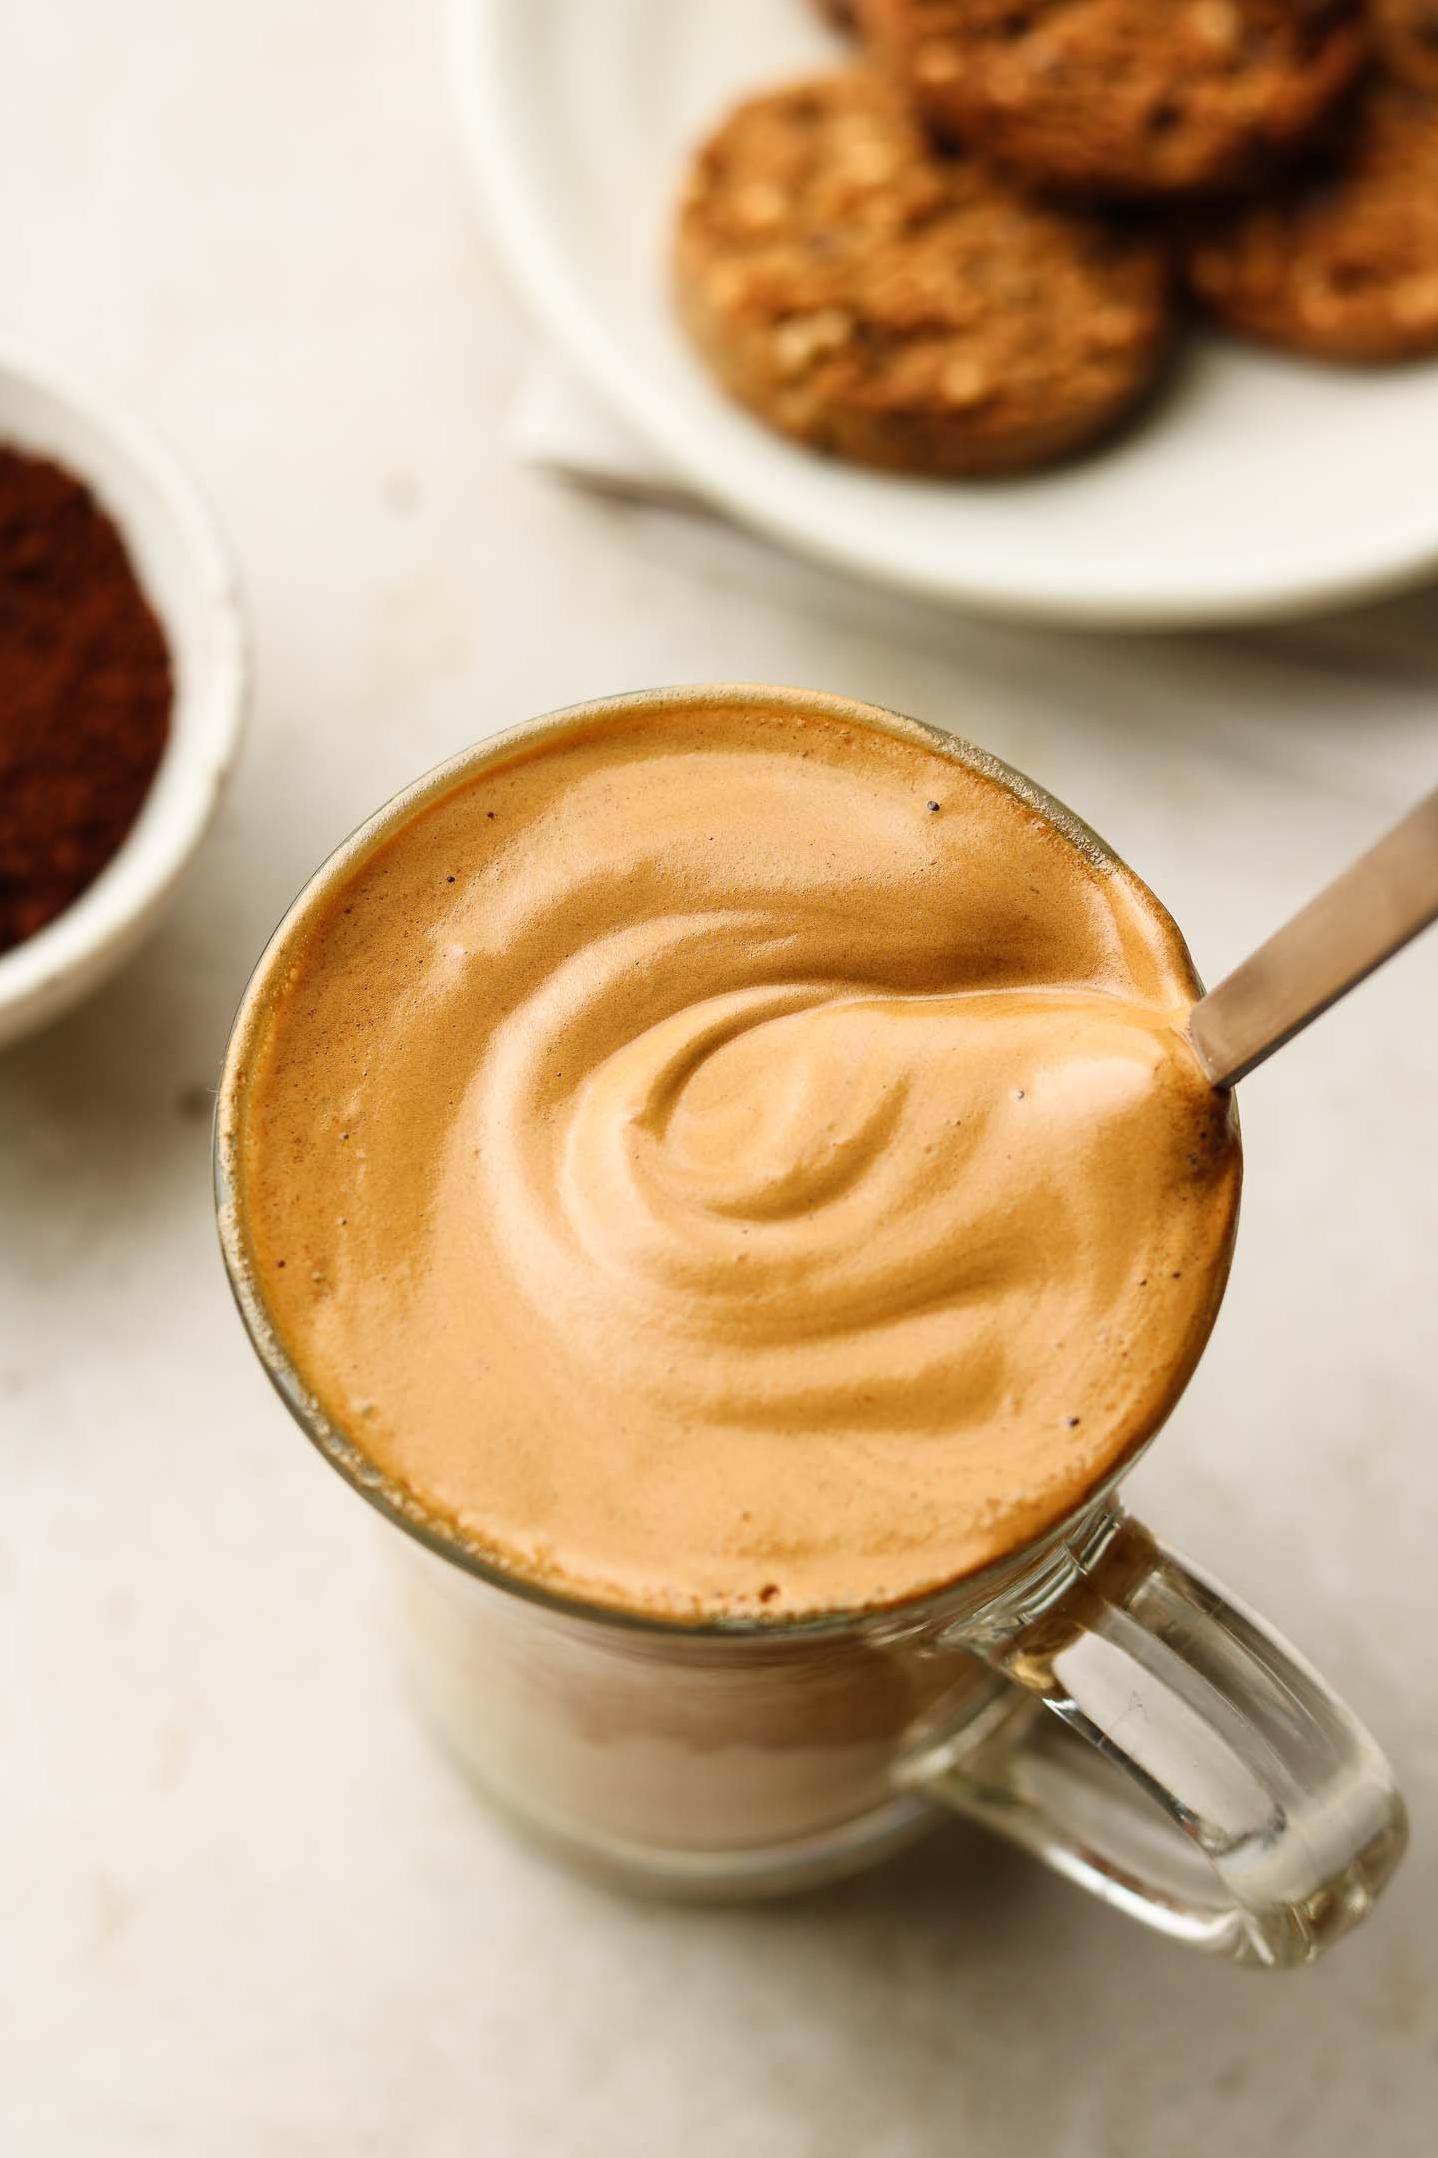  Perfect for coffee lovers who crave creamy and sweet drinks.